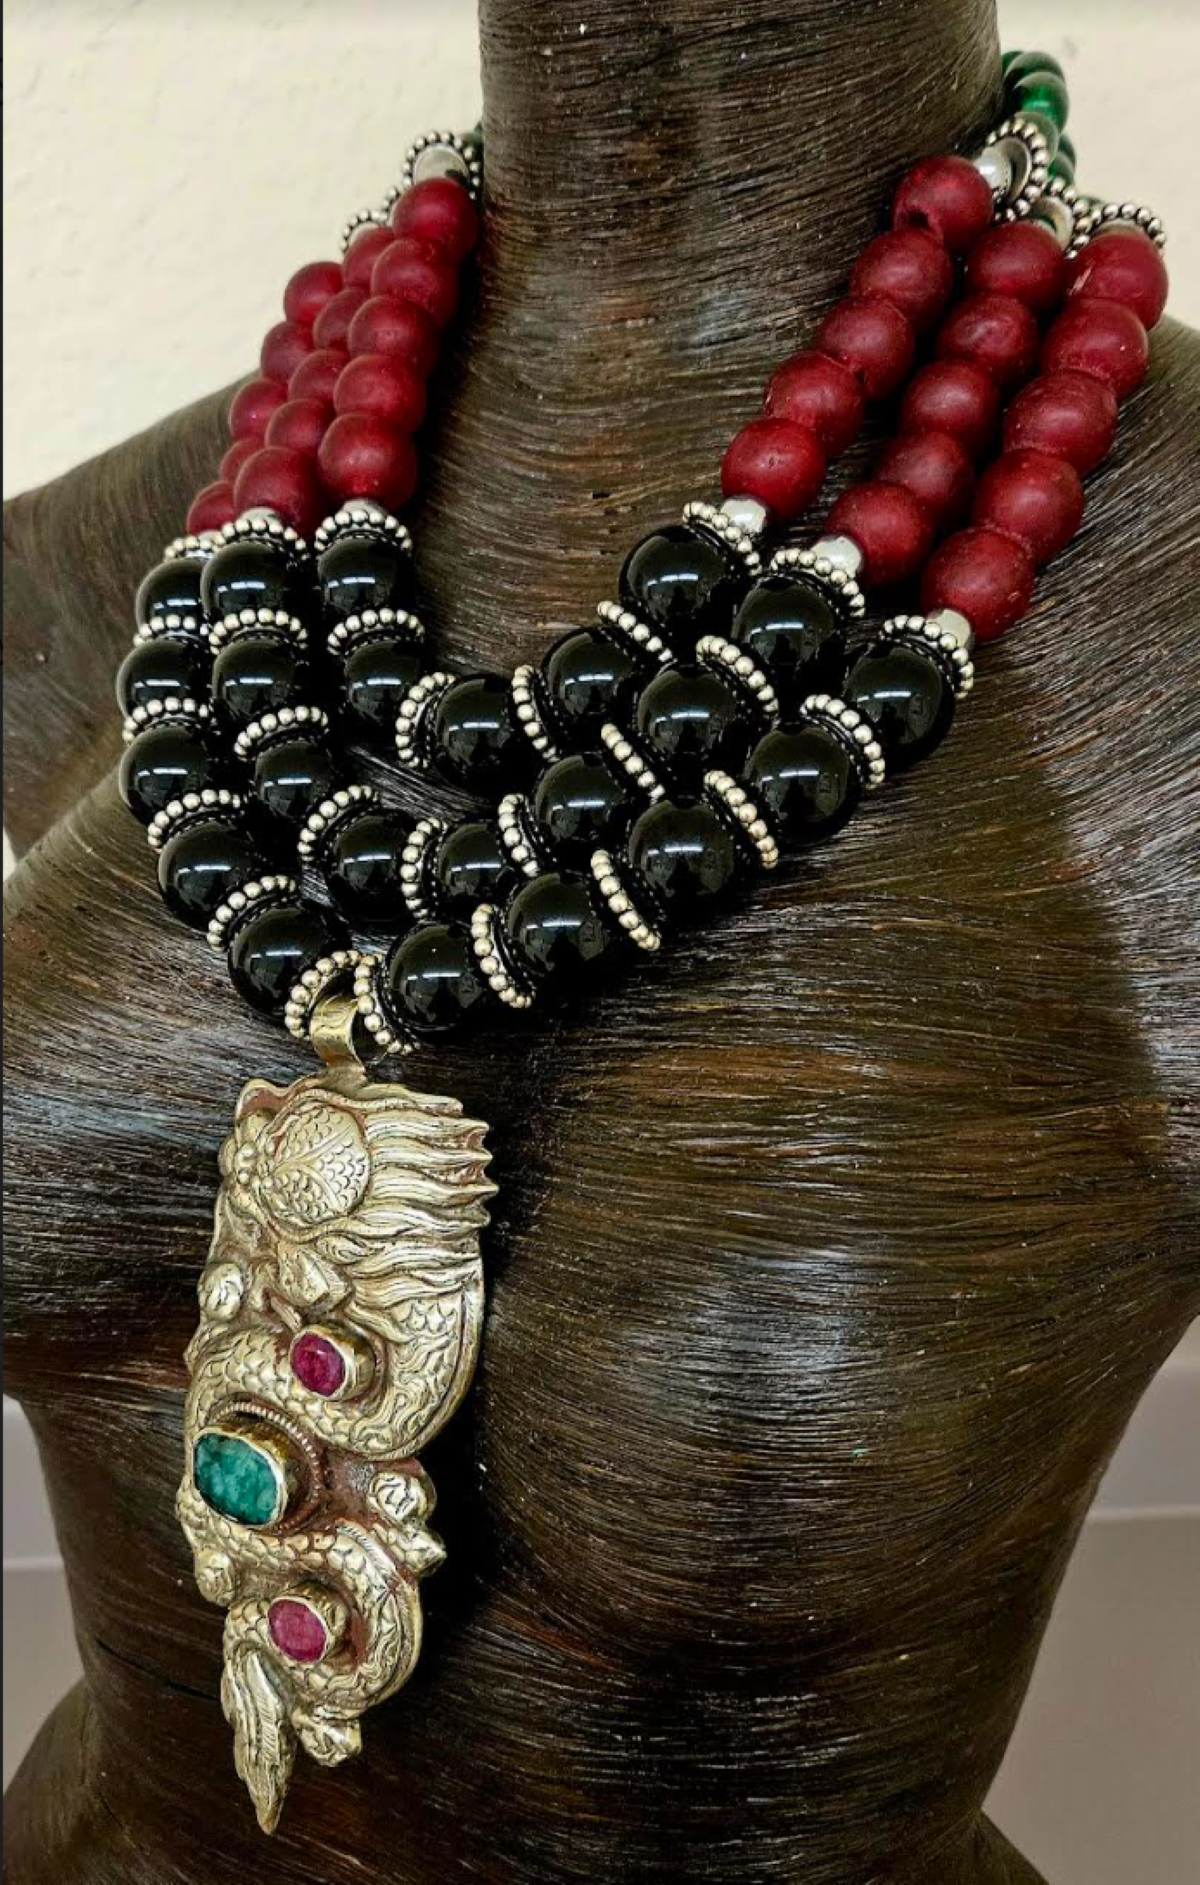 Ornate Tibetan Dragon Pendant on Multi Strand Onyx & Glass Bib Necklace, Red Green Black and Silver Beaded Chest Piece, Haute Couture Jewelry for Photoshoots